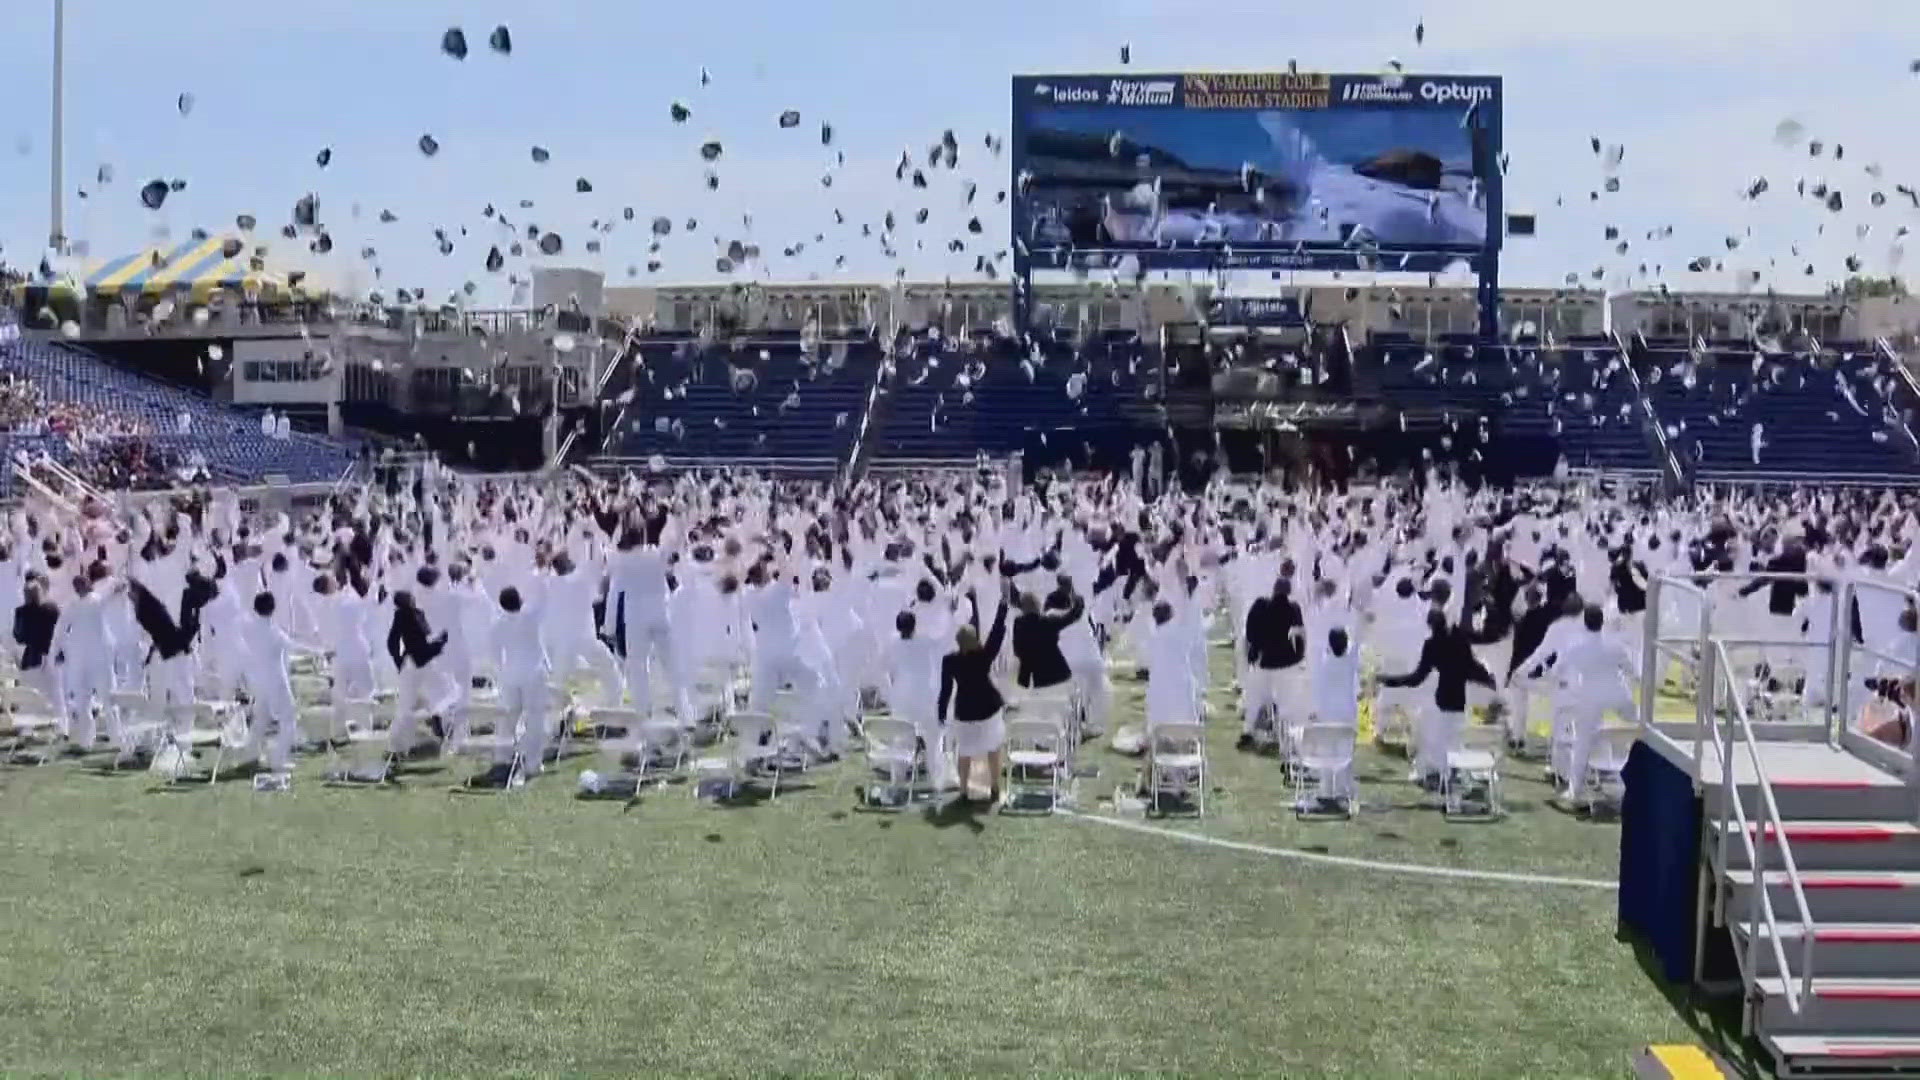 The hat toss at the Naval Academy Graduation. More than one-thousand men and women graduated today.